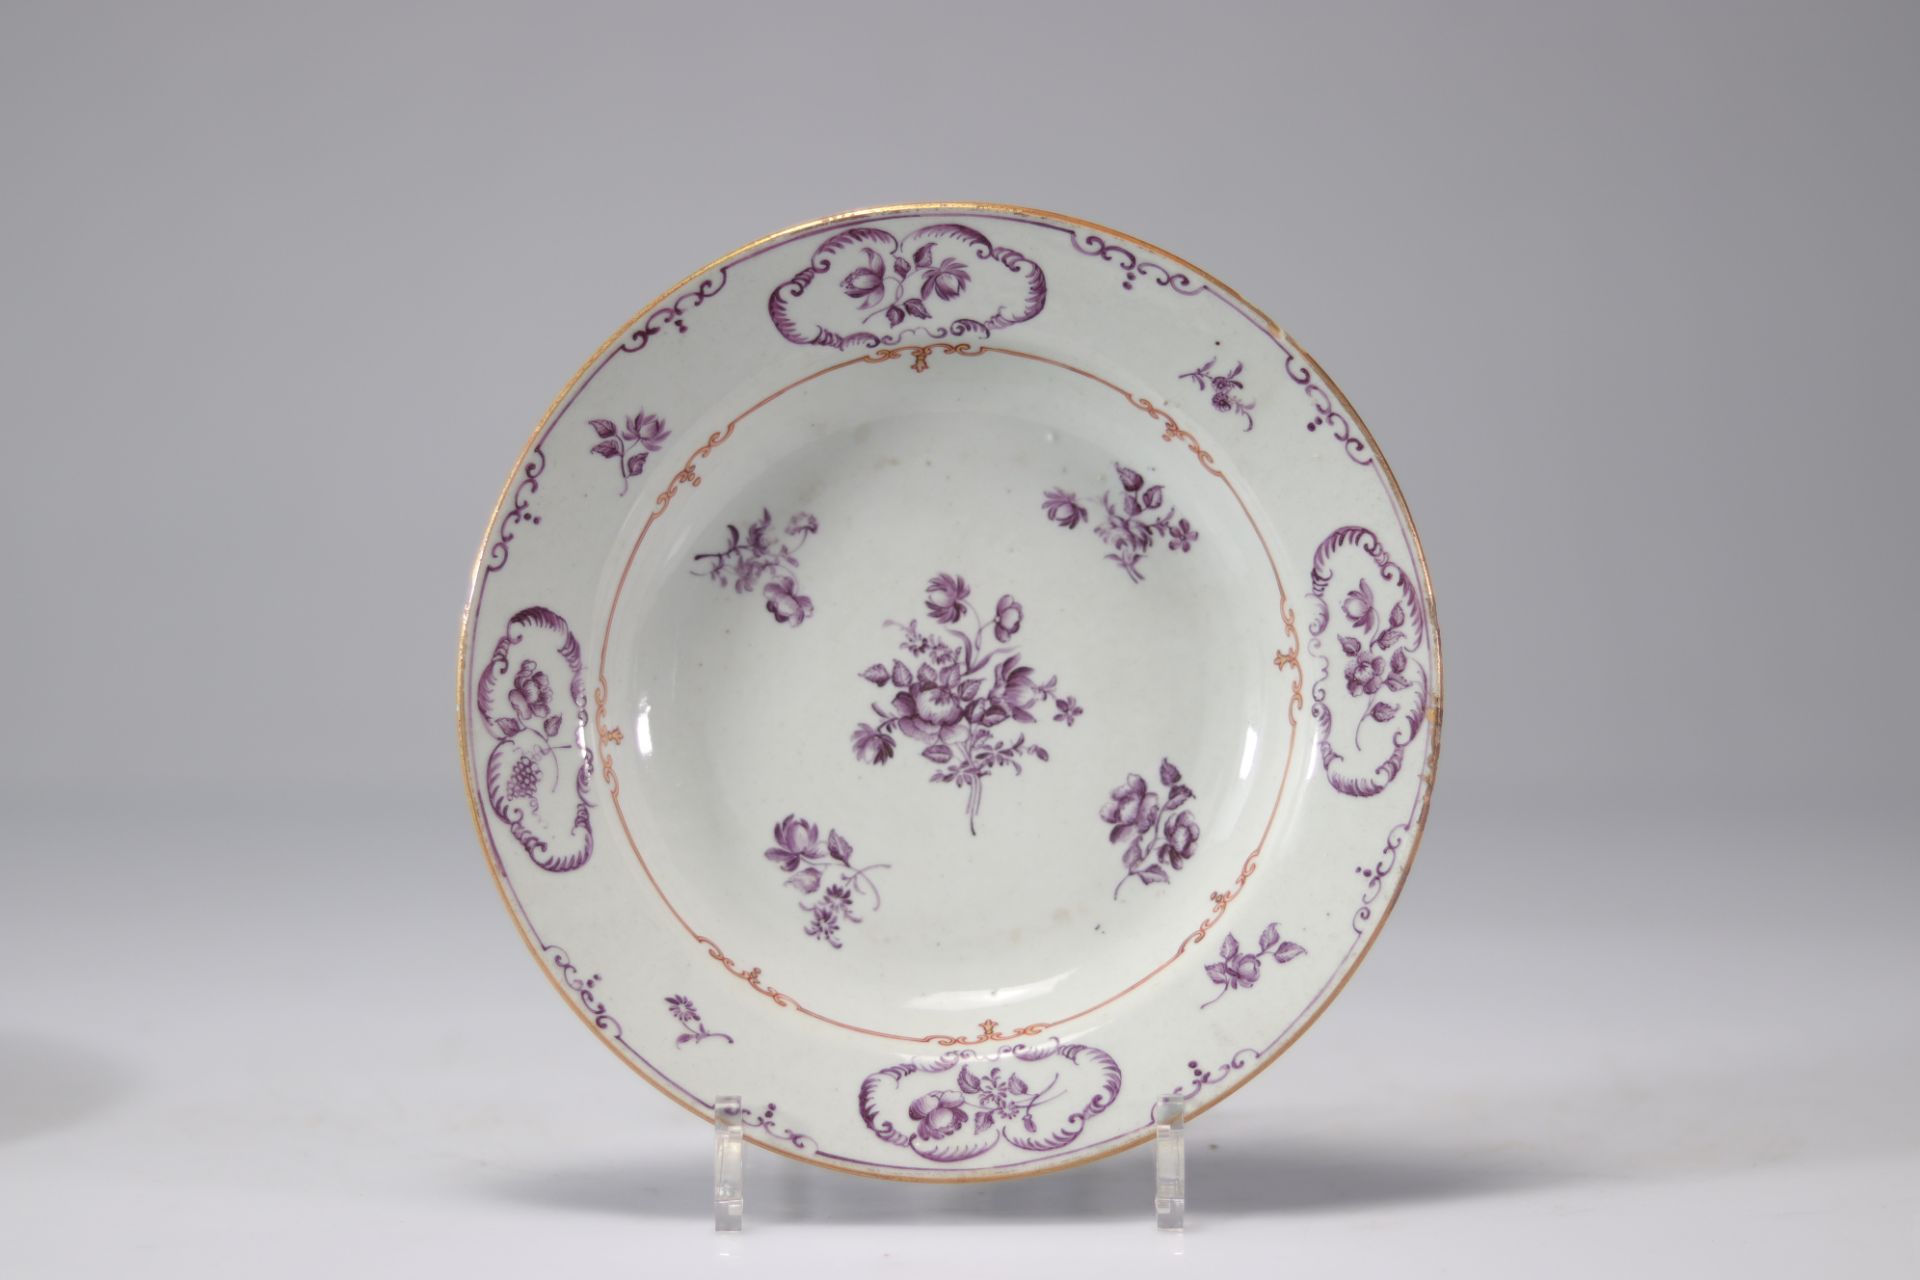 Plates (4) in Chinese porcelain Compagnie des Indes - Image 3 of 6